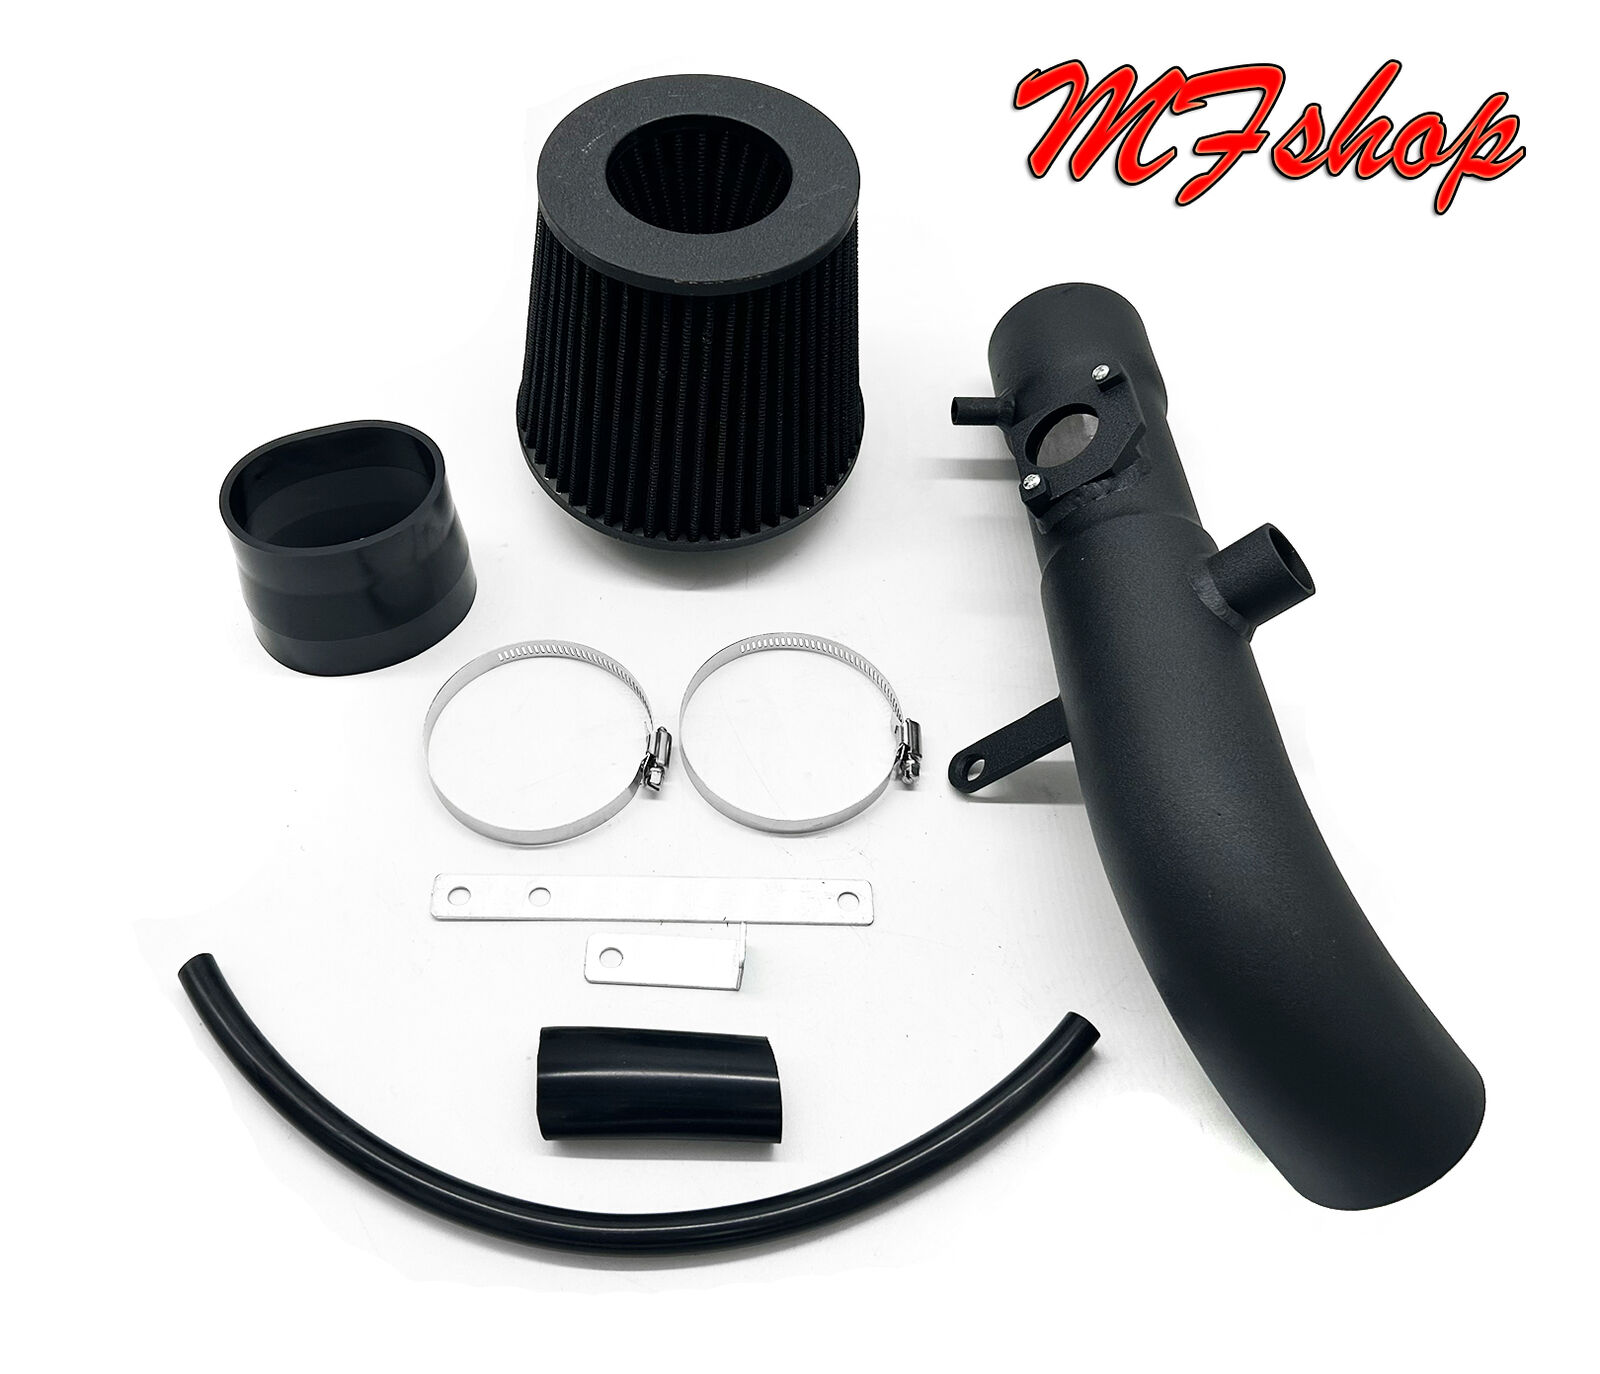 Coated Black Air Intake Filter Kit For 2002-2006 Toyota Camry Solara 2.4L L4